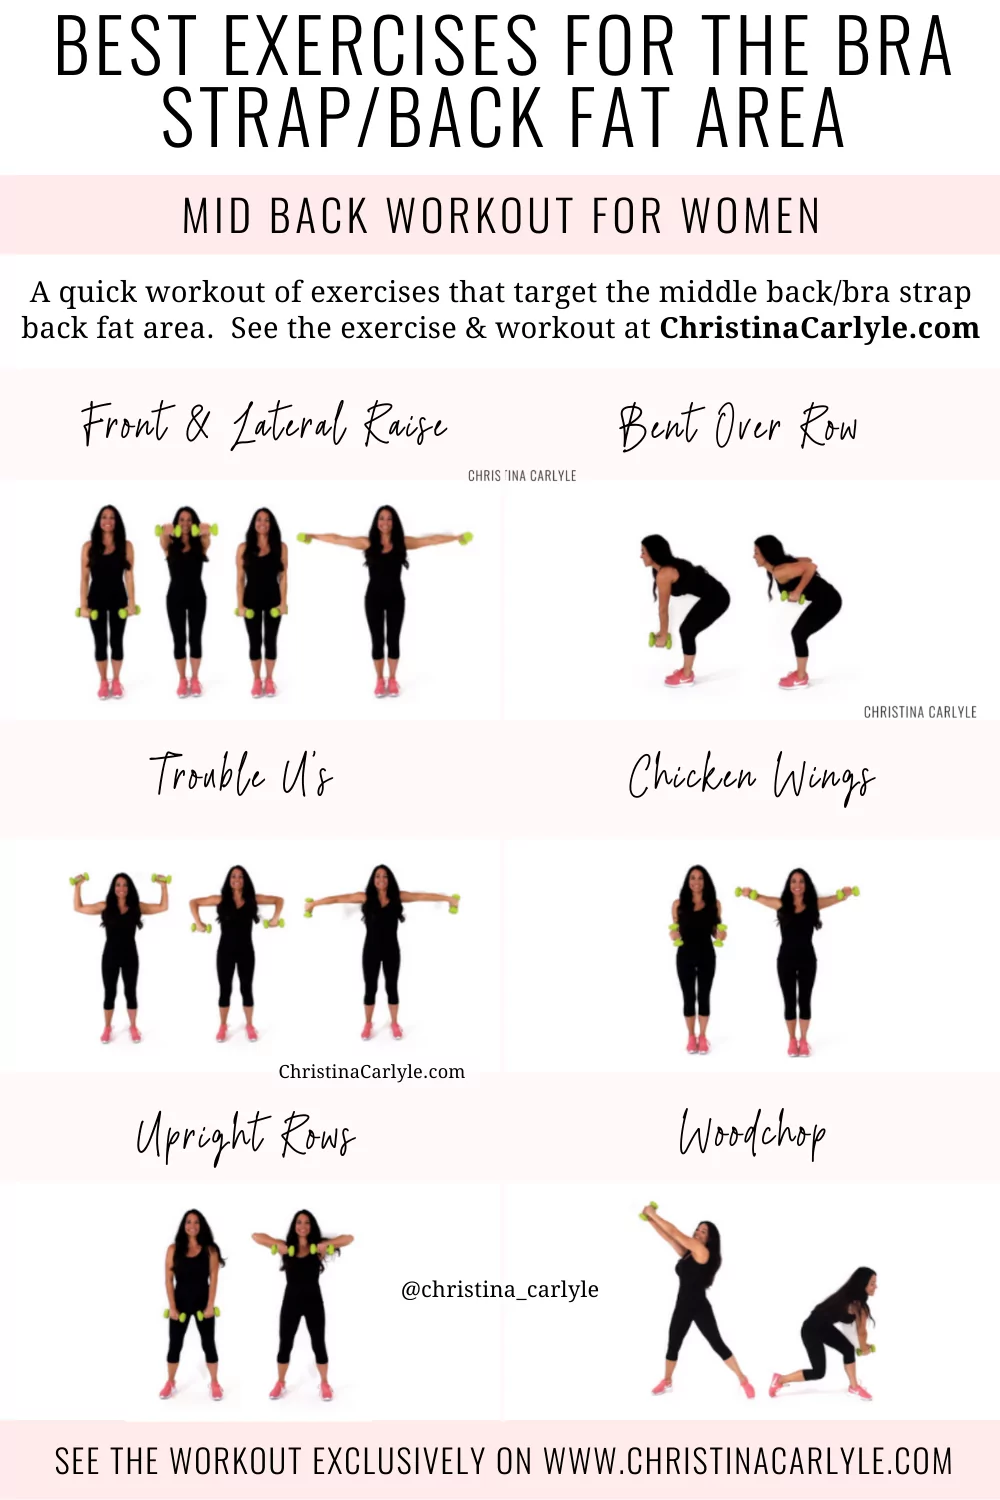 Exercises that Get Rid of Love Handles - Christina Carlyle